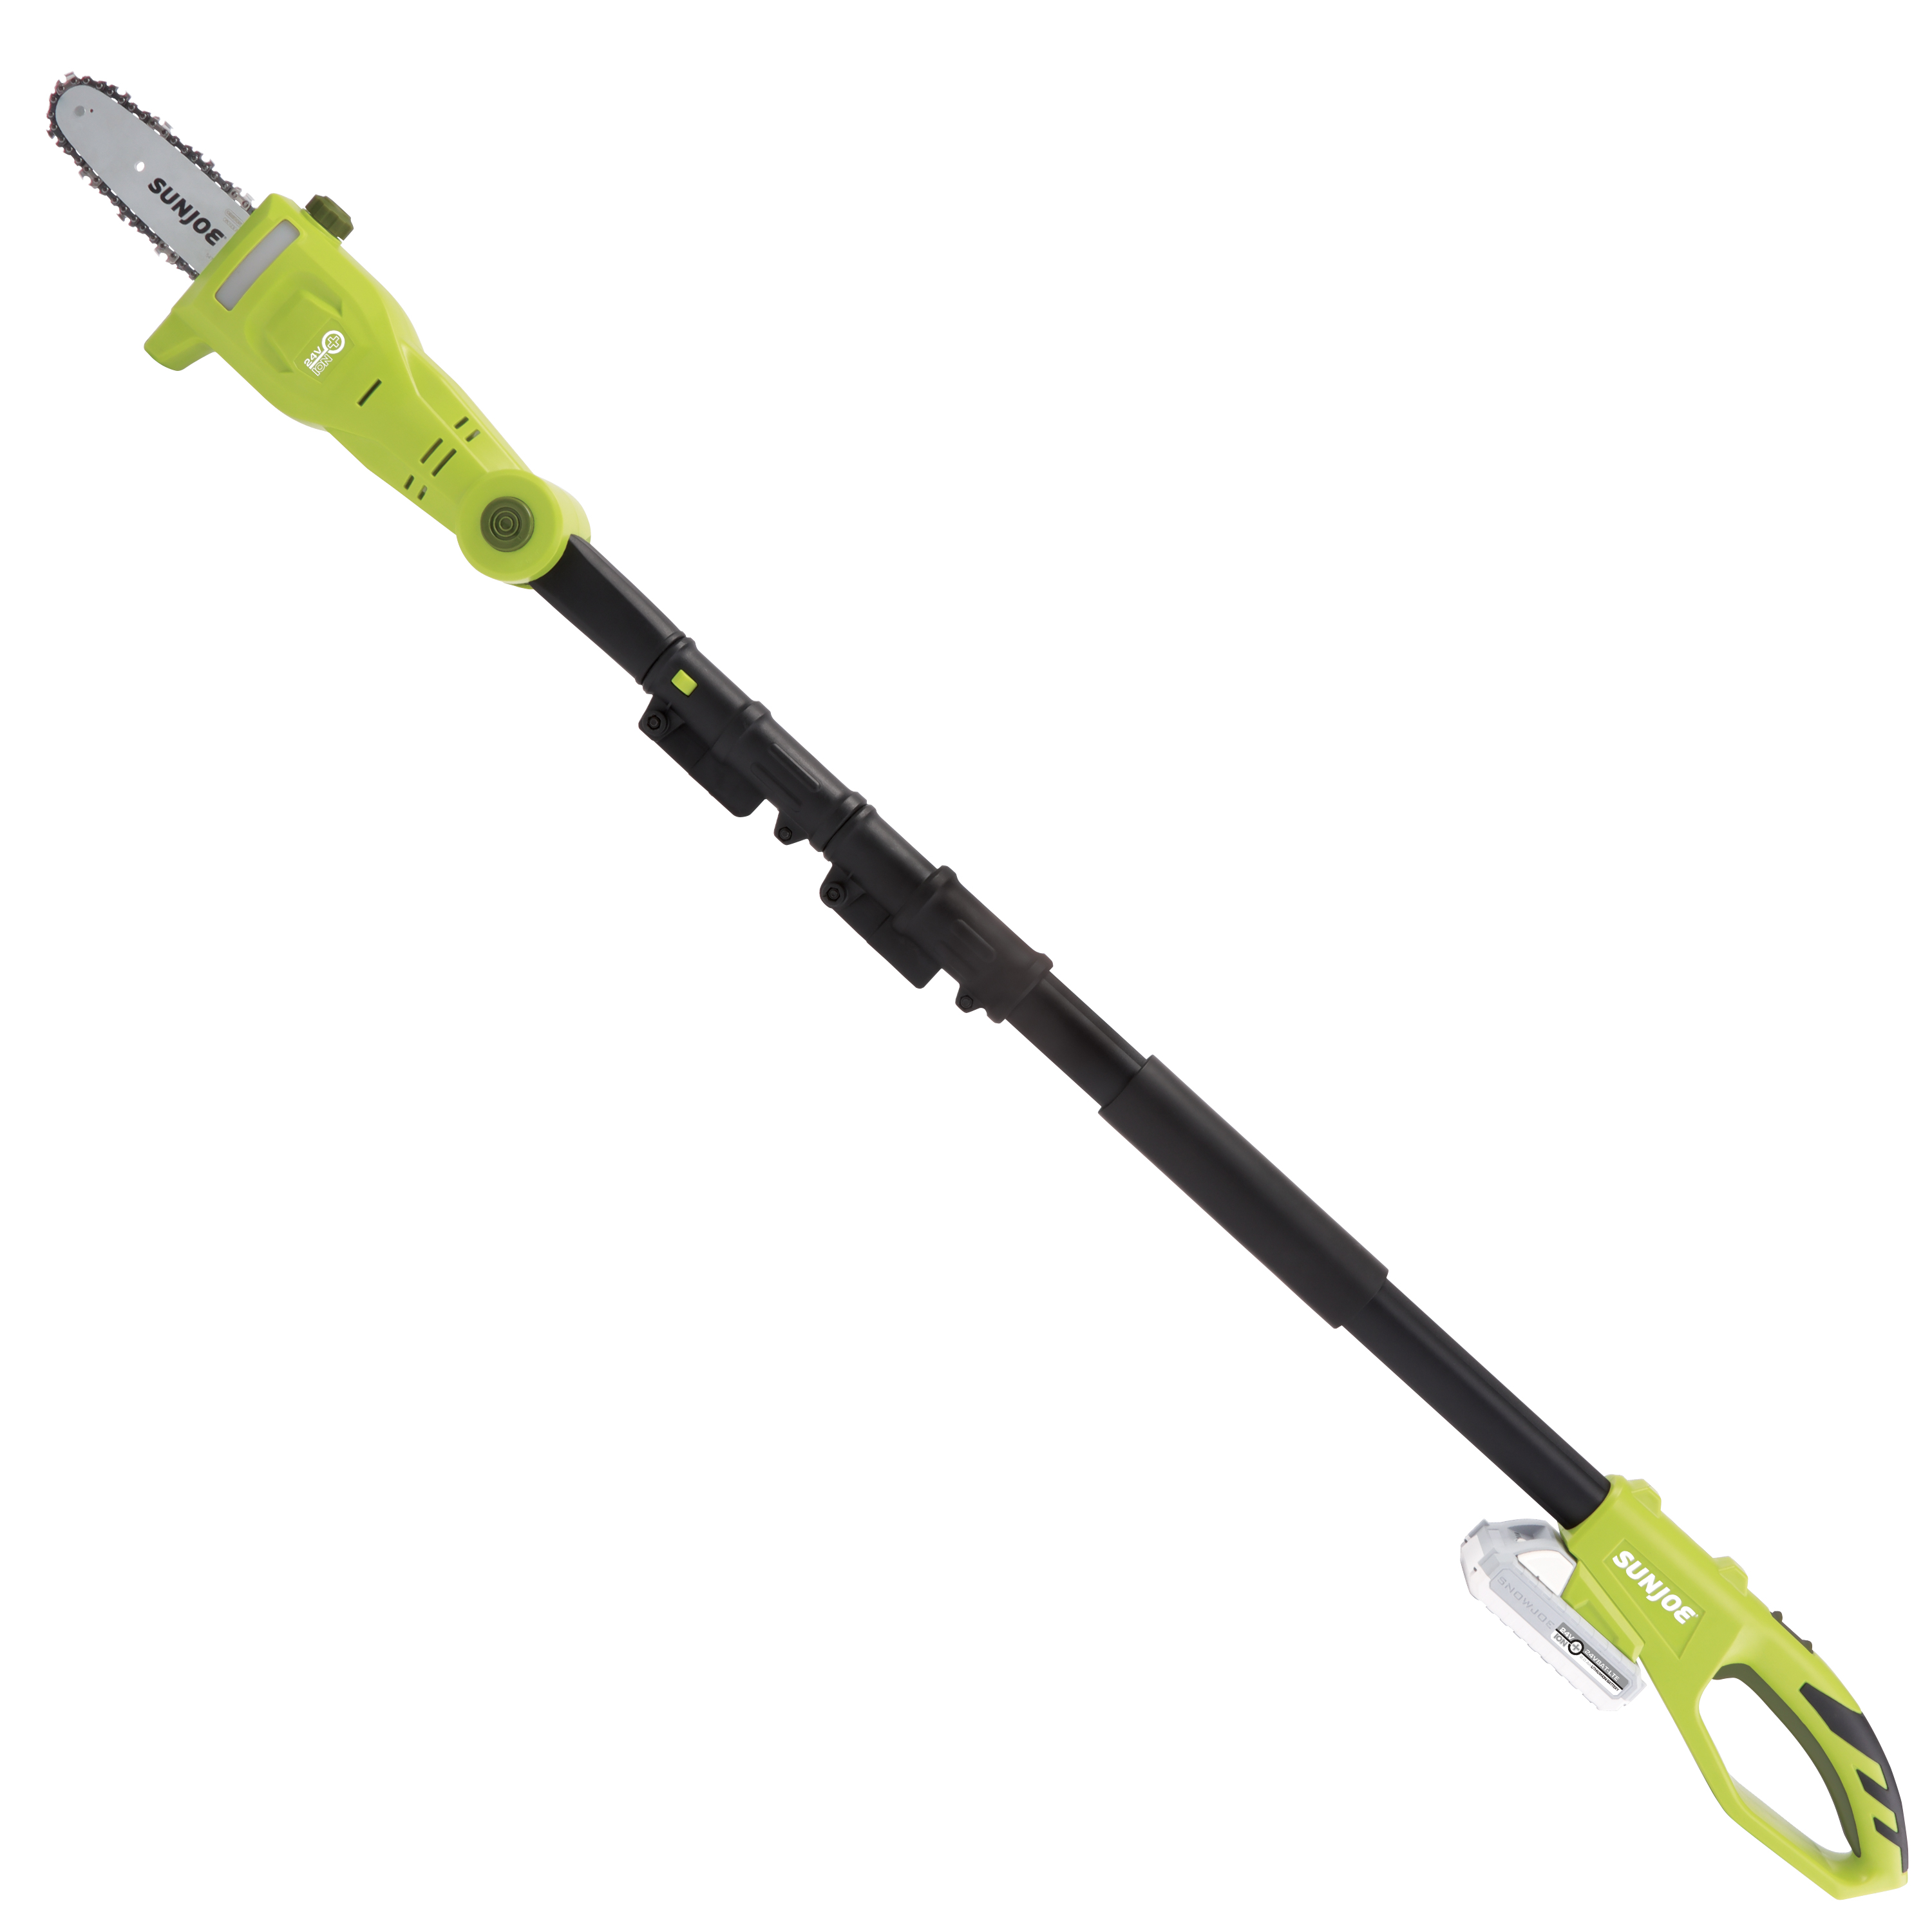 Sun Joe 24V-PS10-LTE 24-Volt iON+ 10-inch Cordless Telescoping Pole Chainsaw Kit w/ 2.0-Ah Battery and Charger Green 